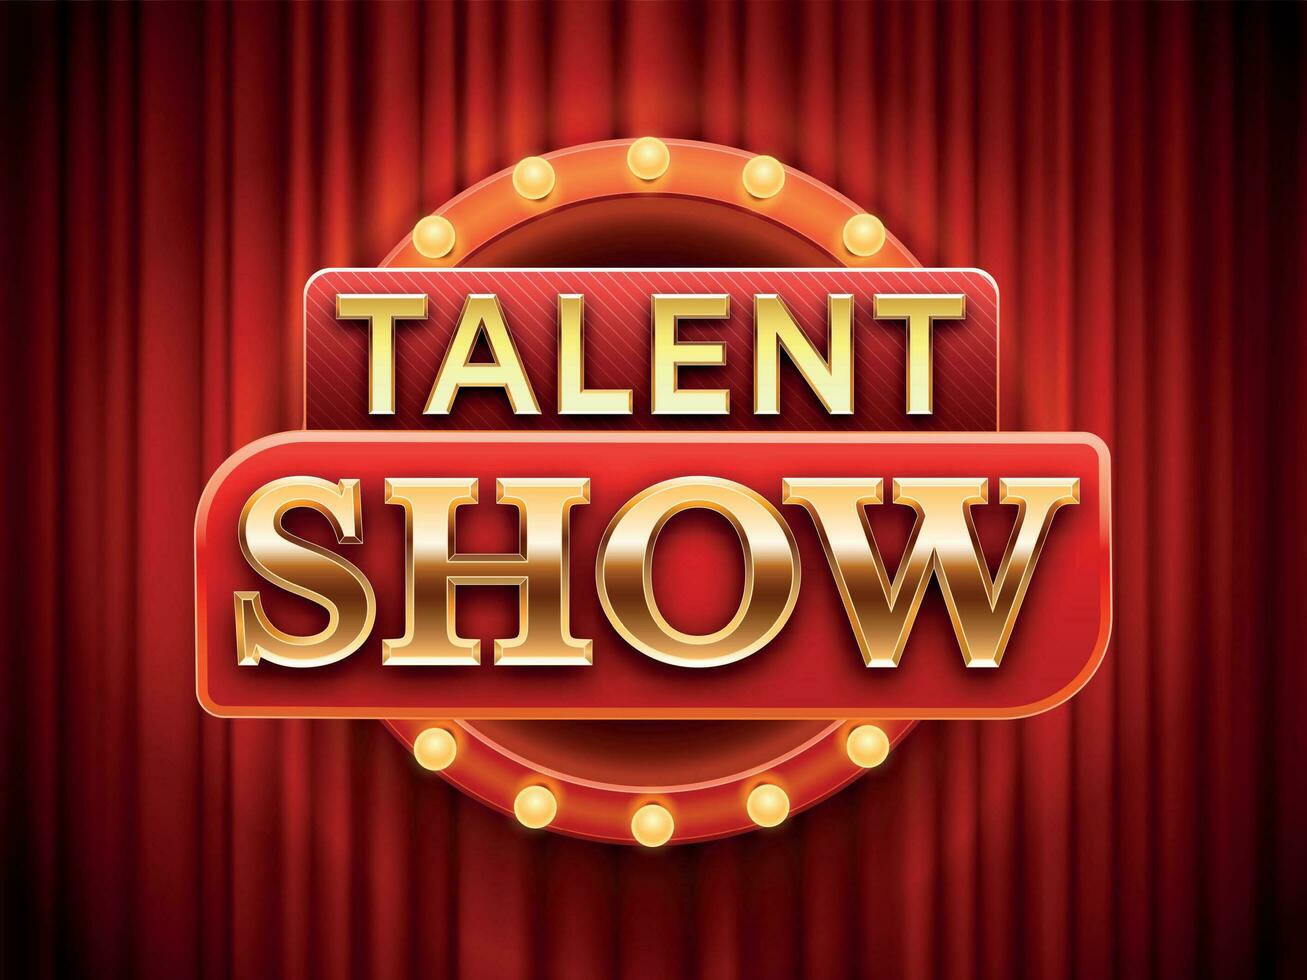 Talent show sign. Talented stage banner, snows scene red curtains and event invitation poster vector illustration